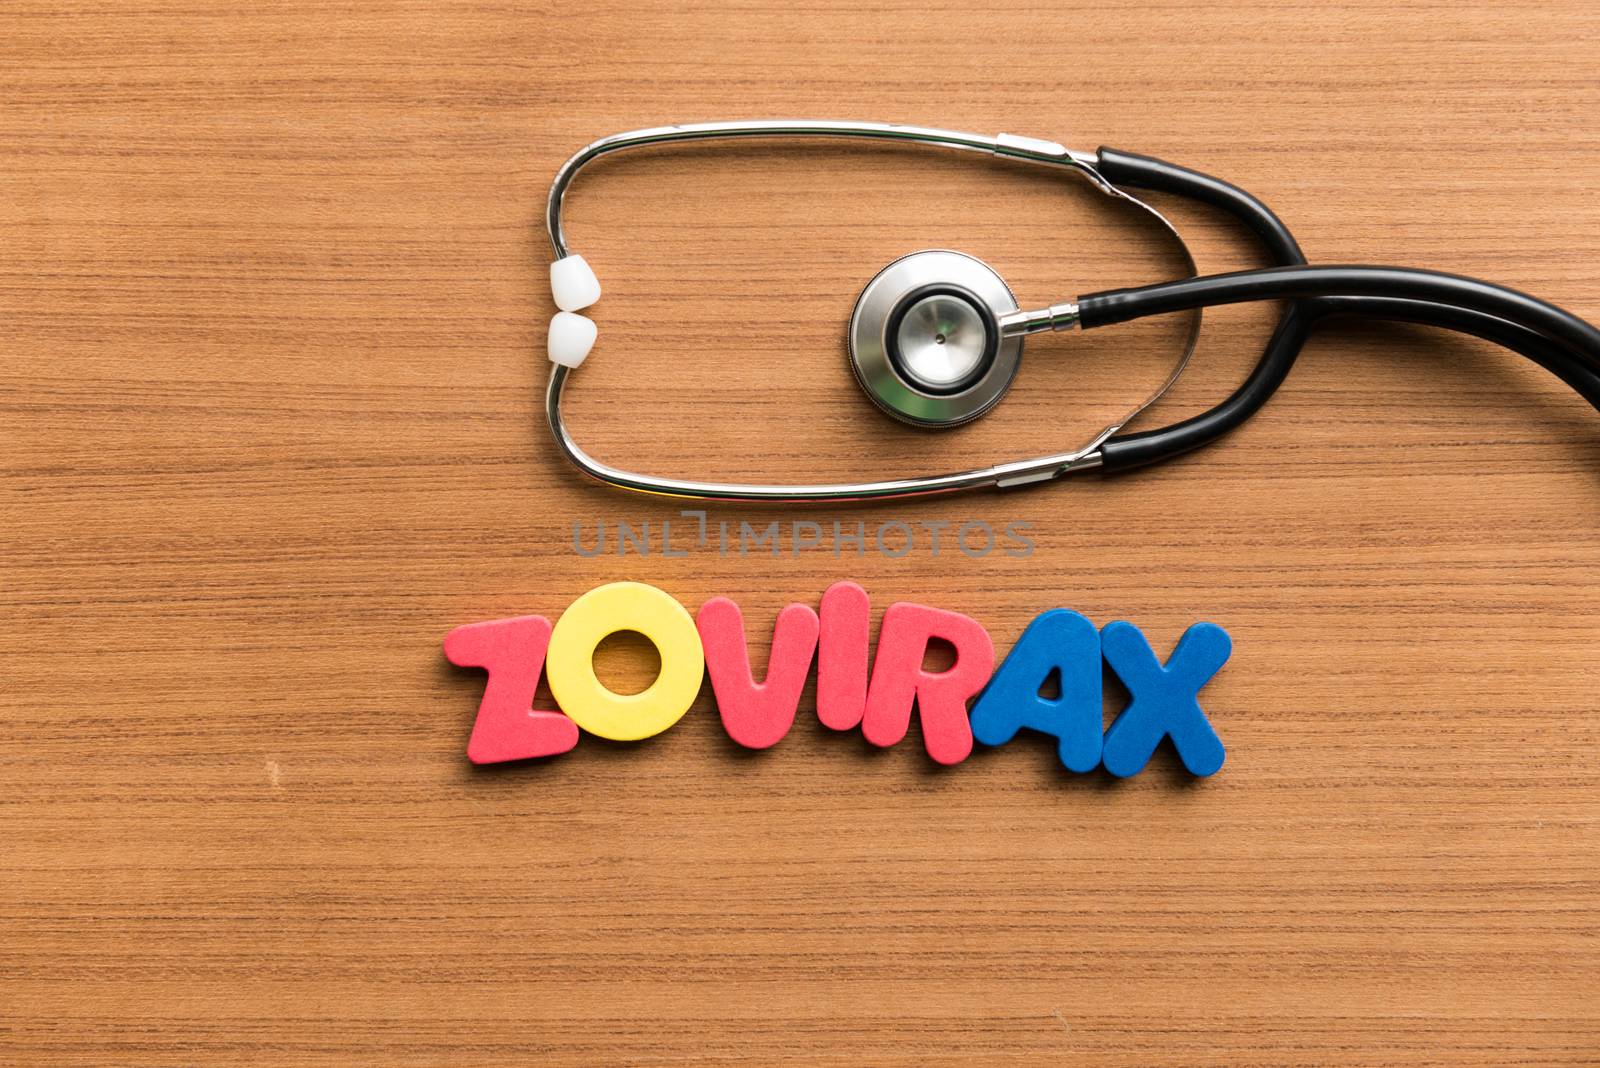 zovirax colorful word with stethoscope on wooden background